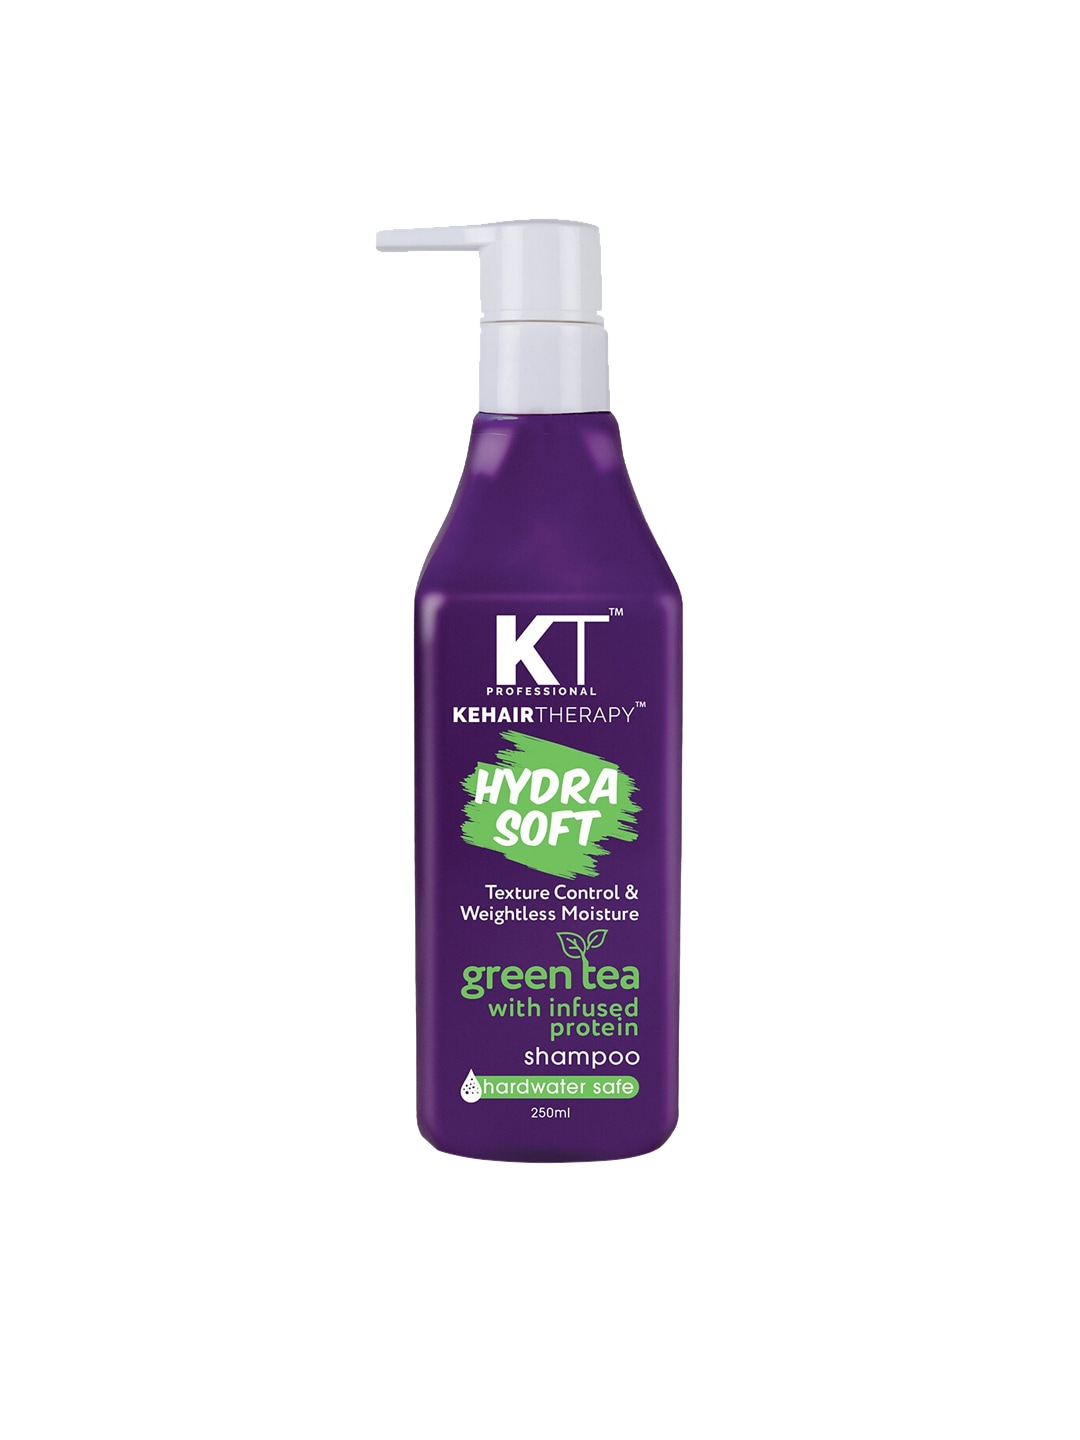 KEHAIRTHERAPY Texture Control & Weightless Moisture Shampoo 250ml Price in India